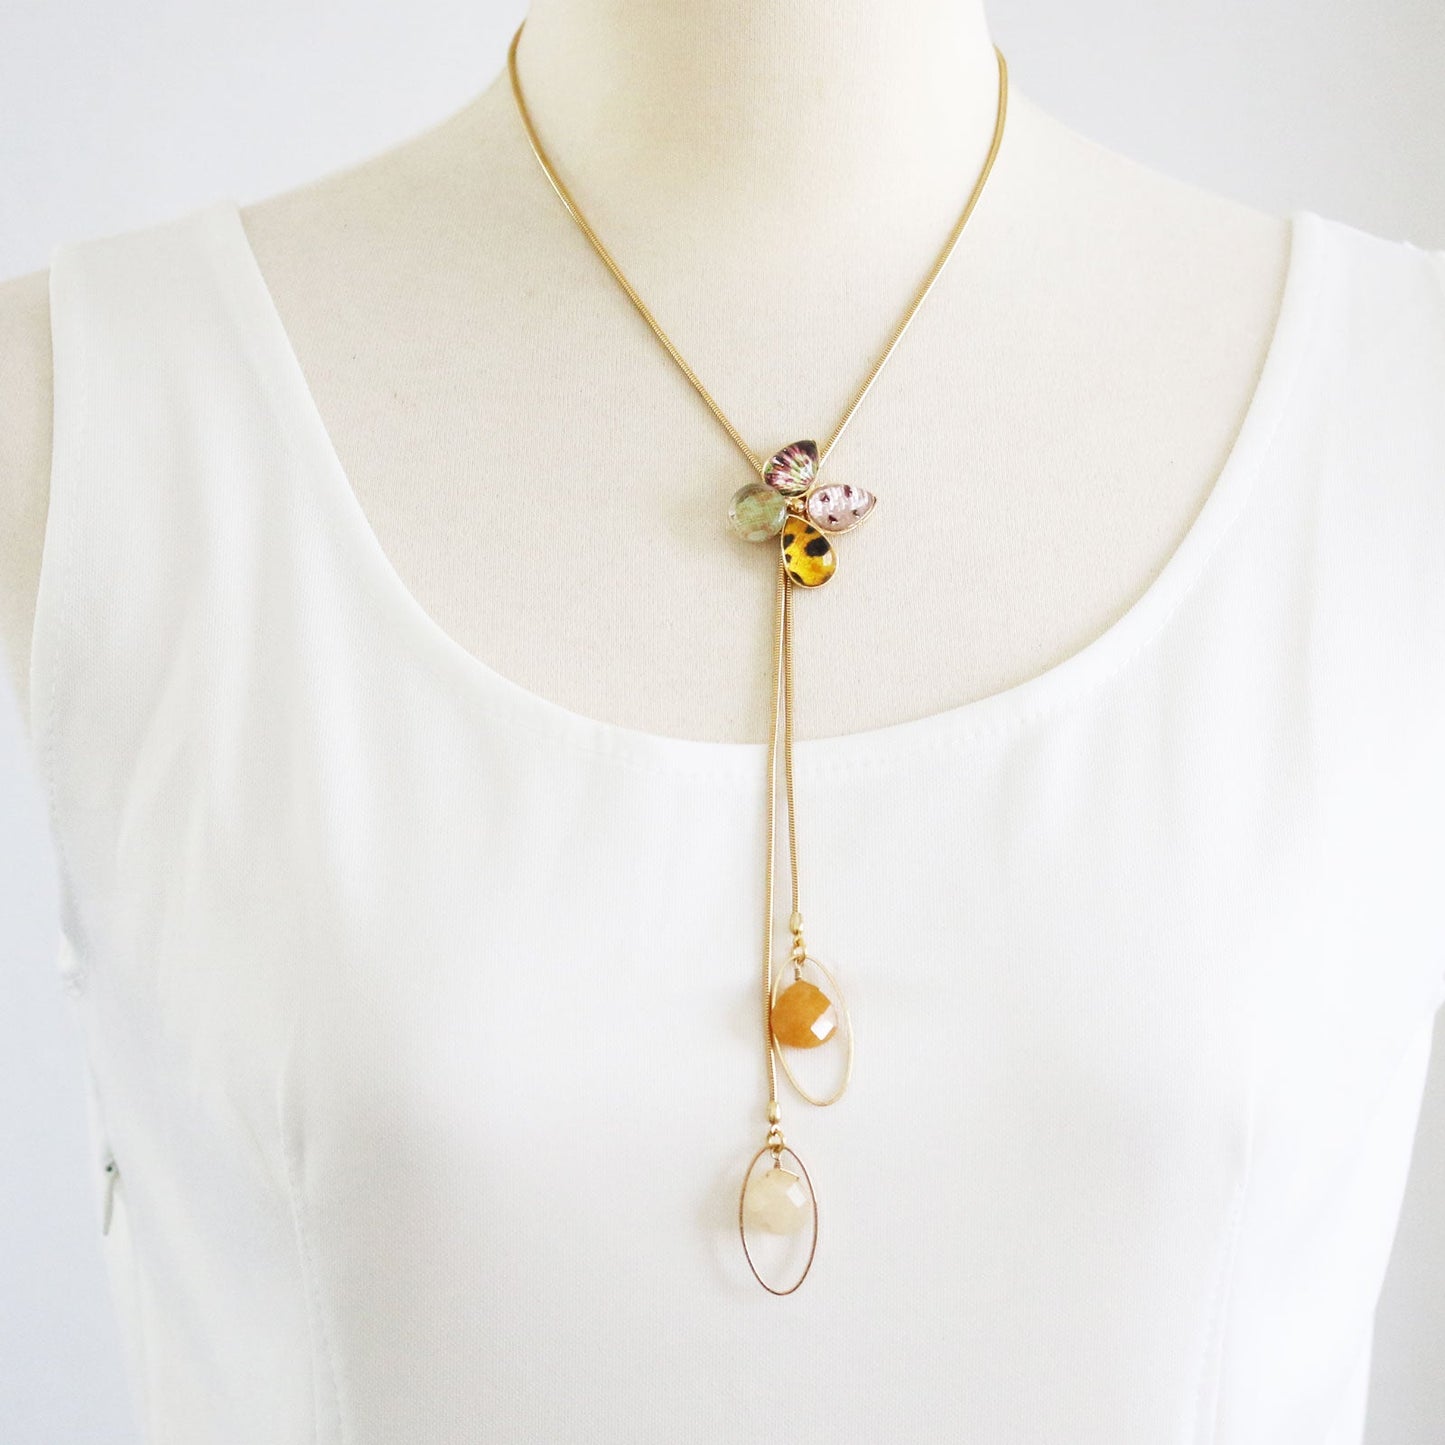 Chain Bolo Tie Gold Long Necklace Resin TAMARUSAN